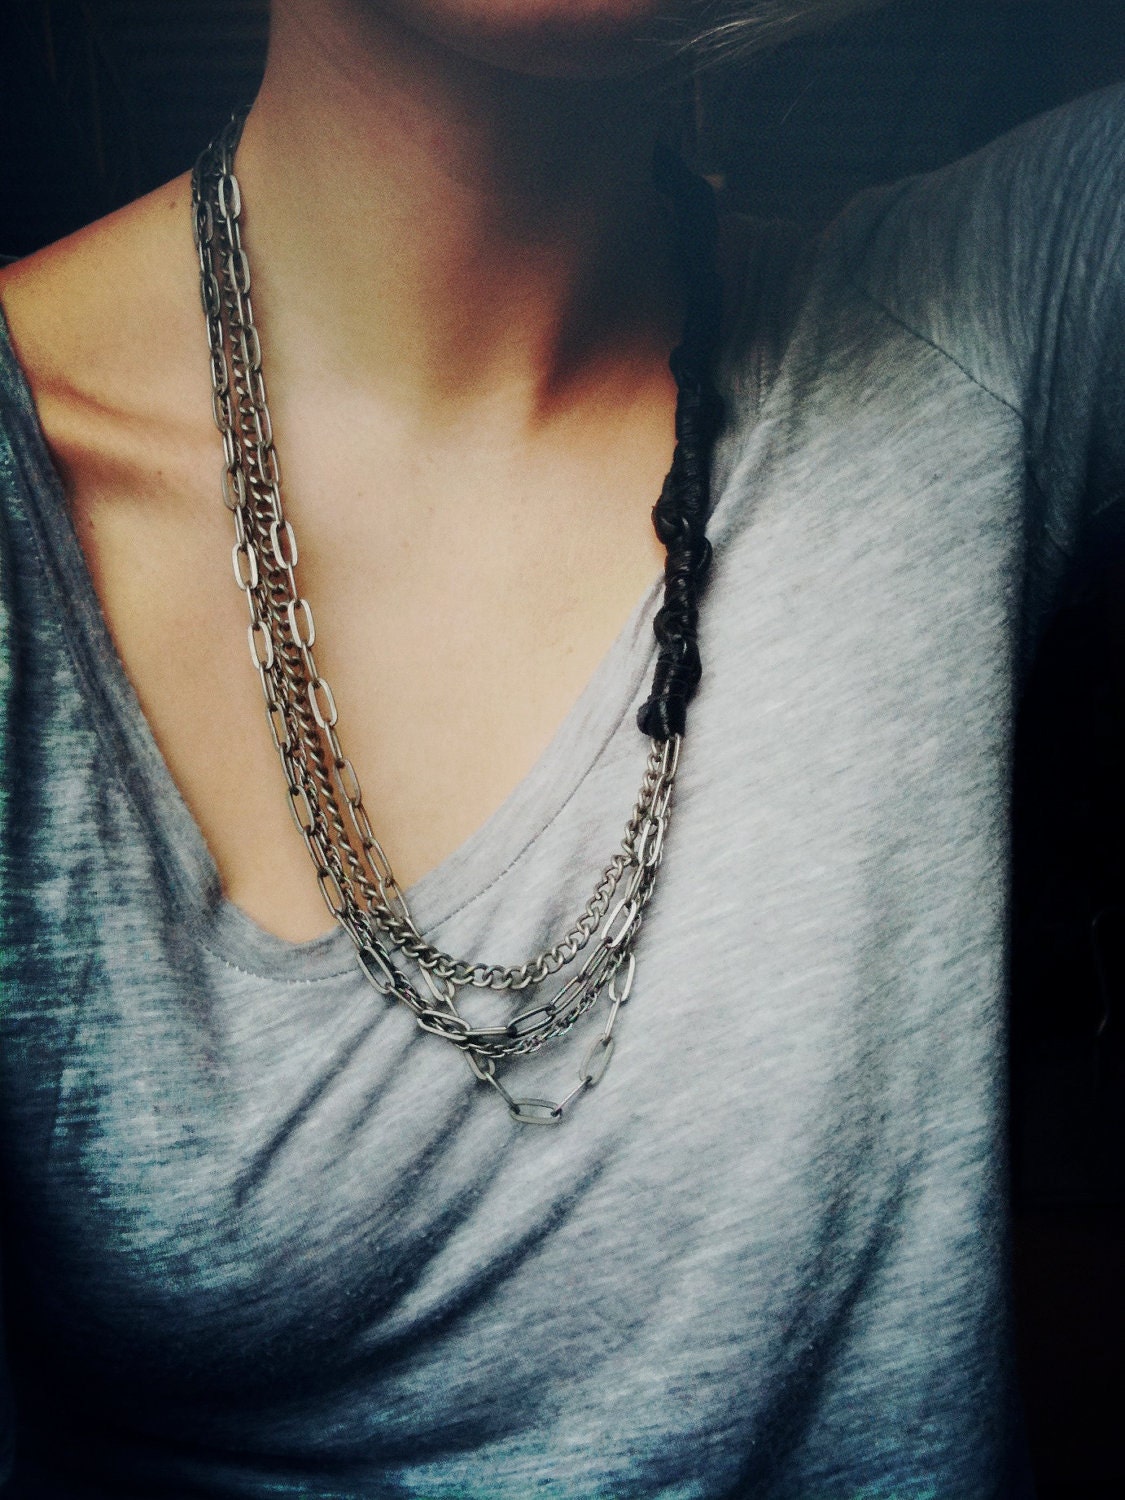 Braided Leather Mulit-Chain Necklace